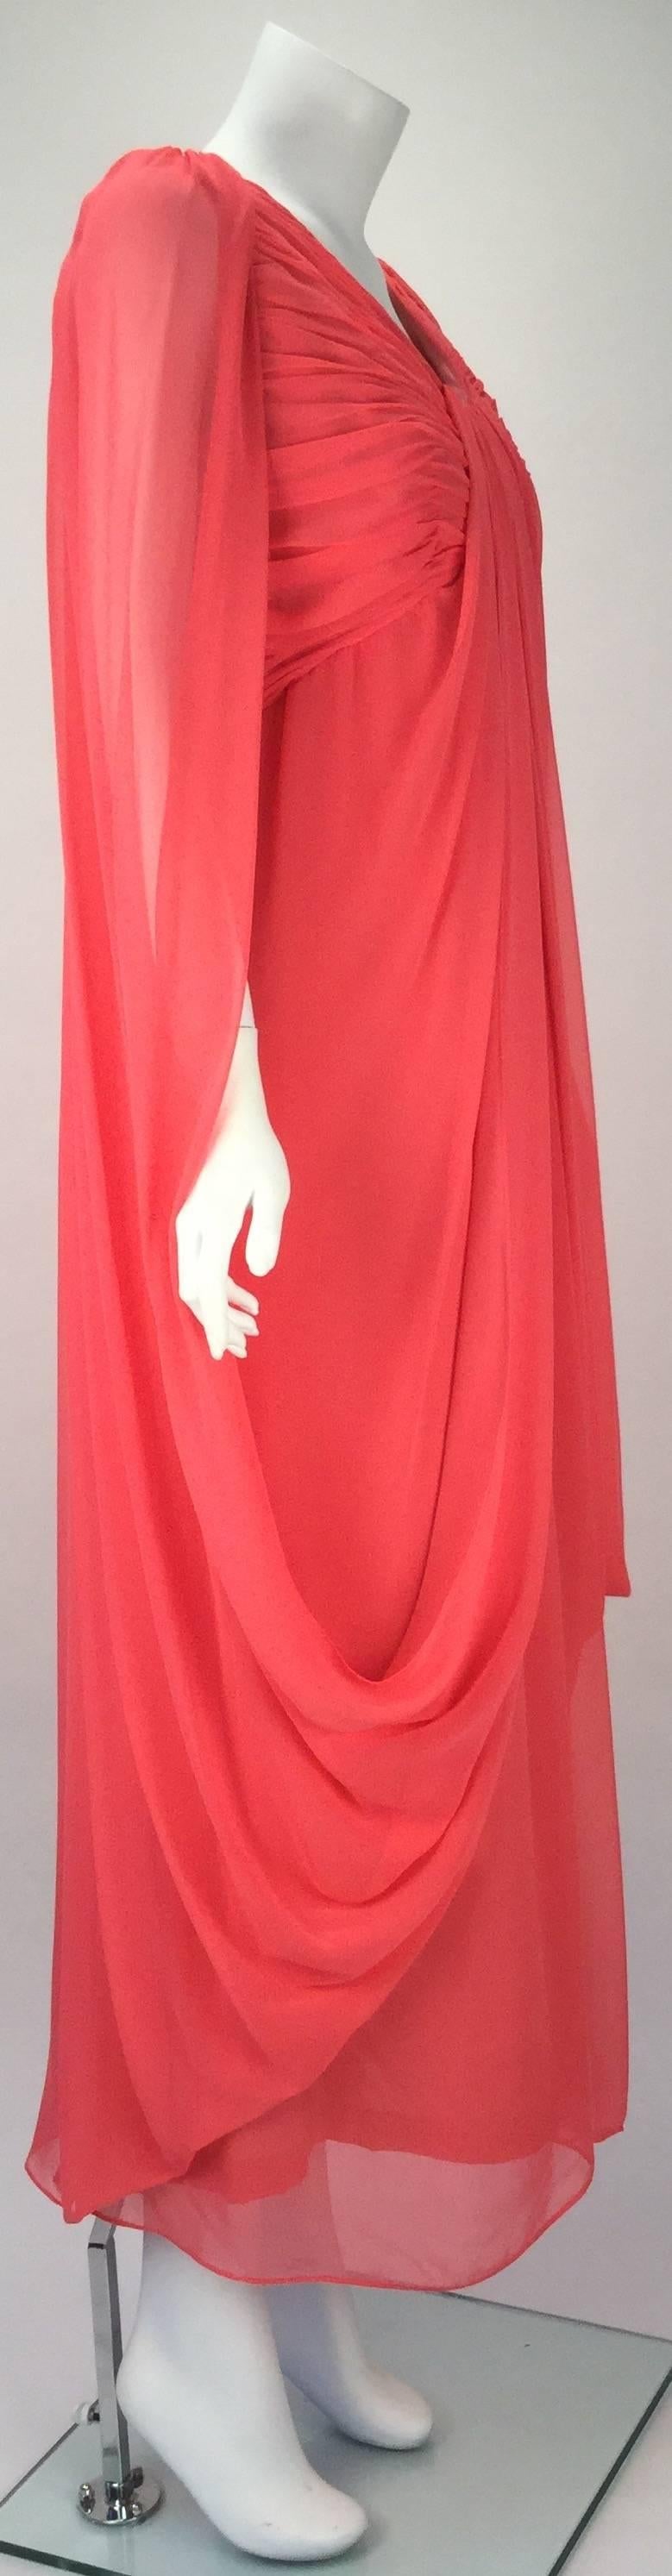 
Ethereal 1970's coral colored sleeveless chiffon evening dress with draping by Victor Costa.absolutely beautiful! 

The front of the dress has ruching at the bust. Chiffon fabric drapes from the front bust down to the skirt and around the back and